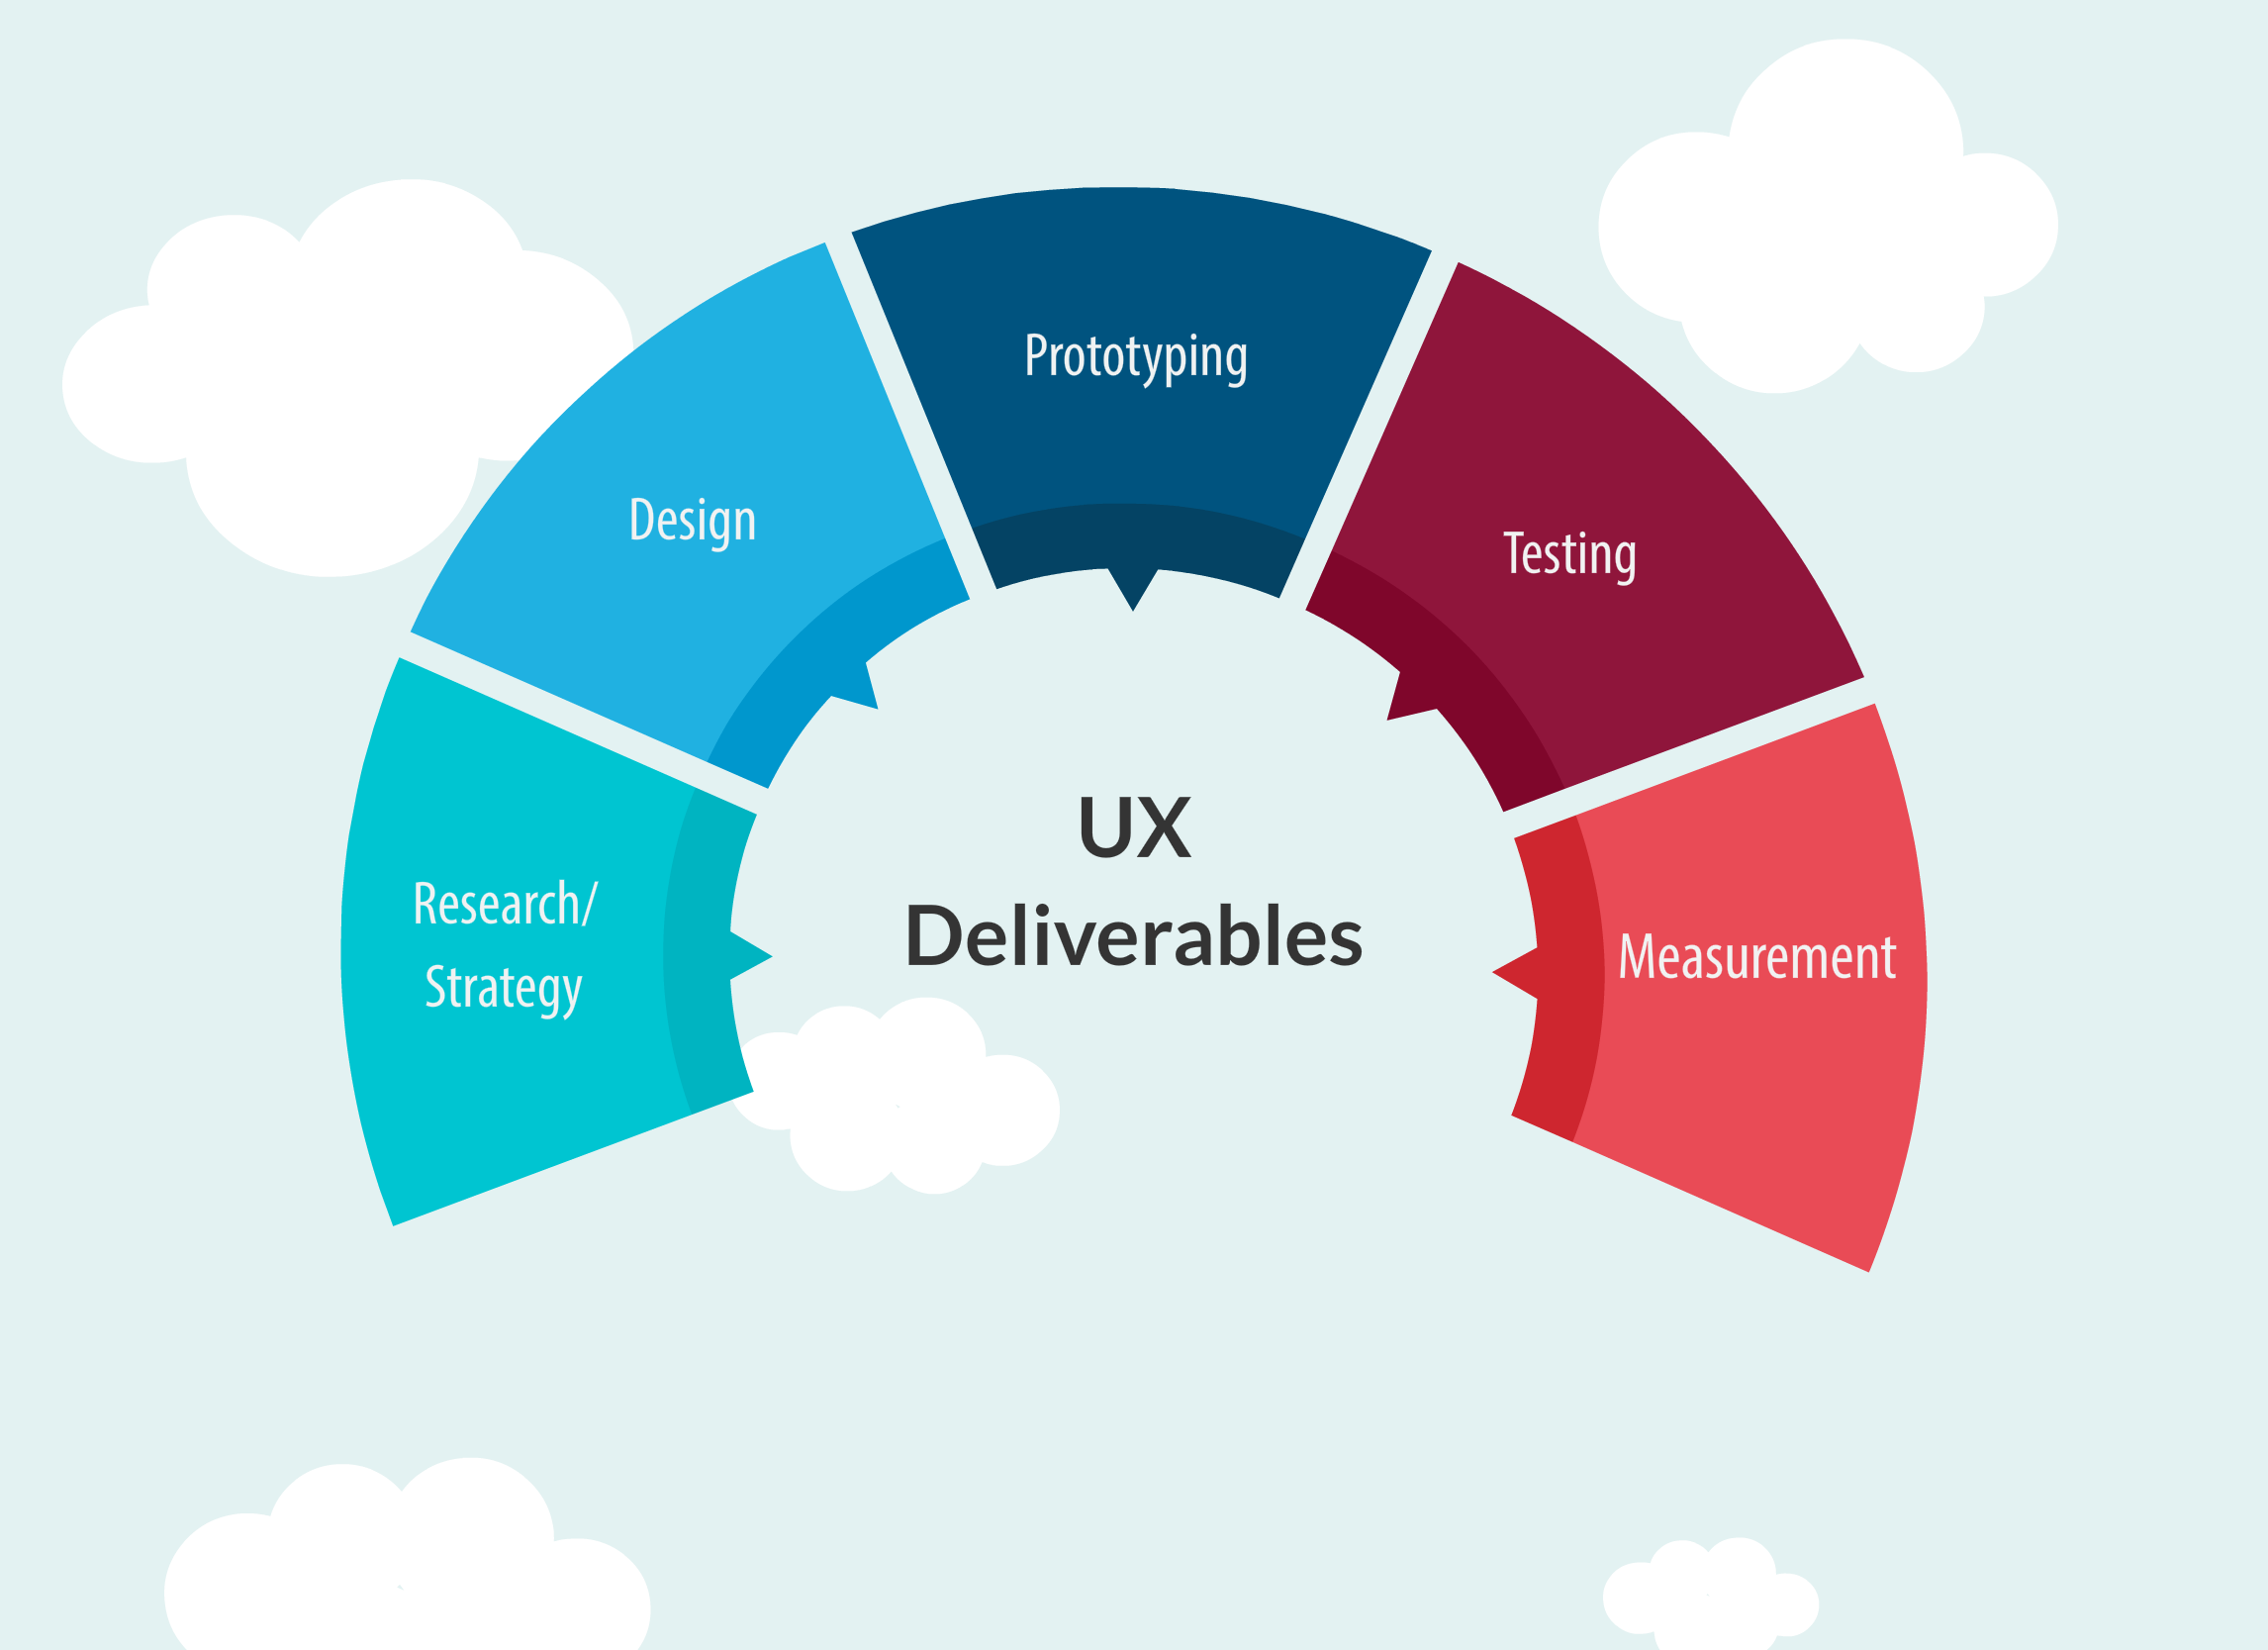 Types of UX Deliverables